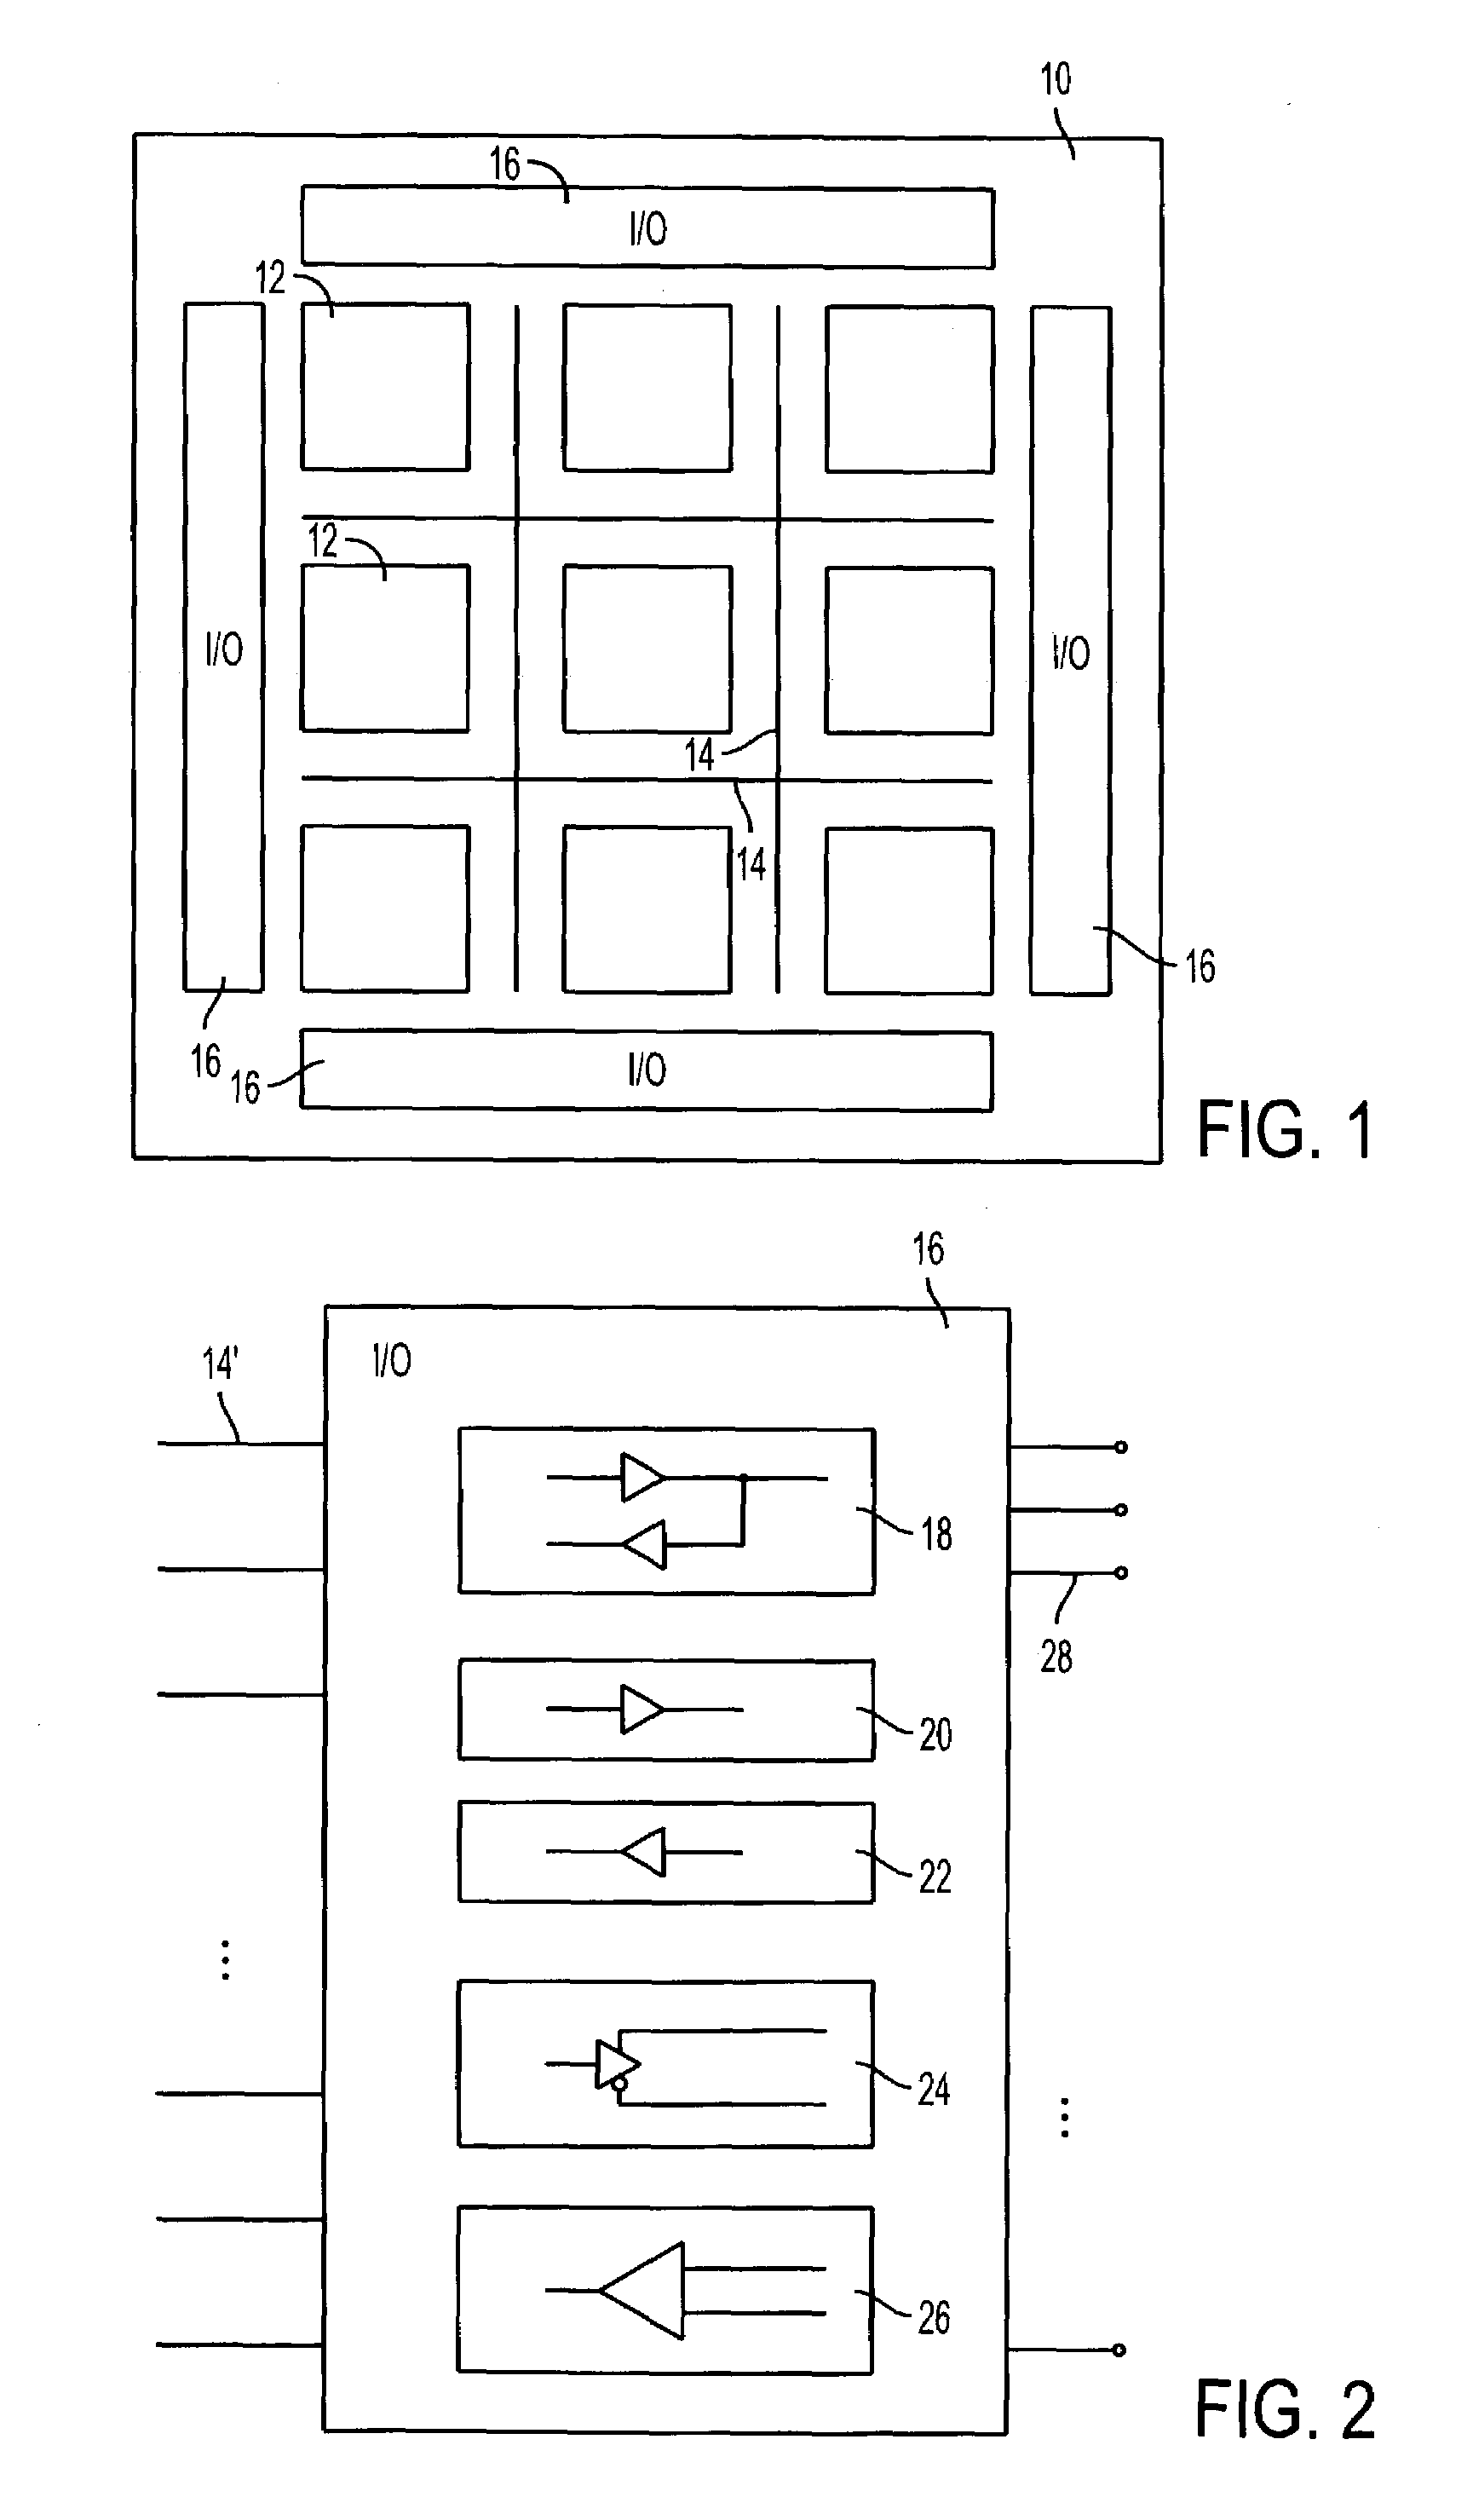 Integrated circuit output driver circuitry with programmable preemphasis